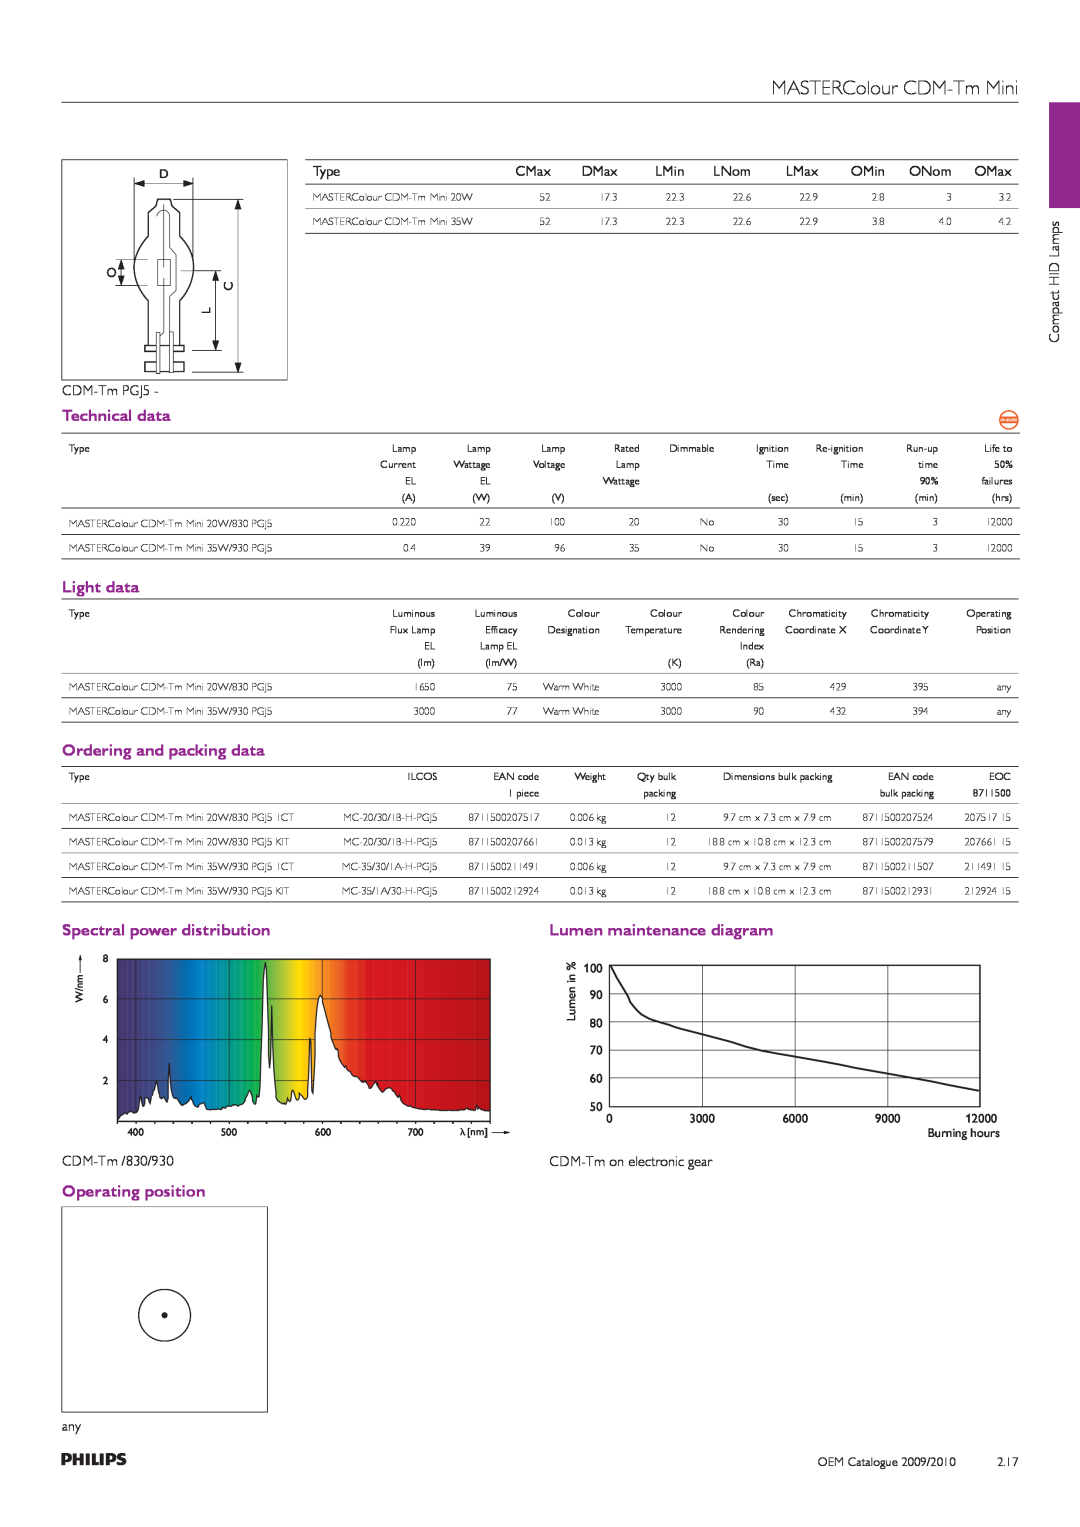 Philips Compact HID Lamp and Gear manual MASTERColour CDM-TmMini, Technical data, Light data, Ordering and packing data 